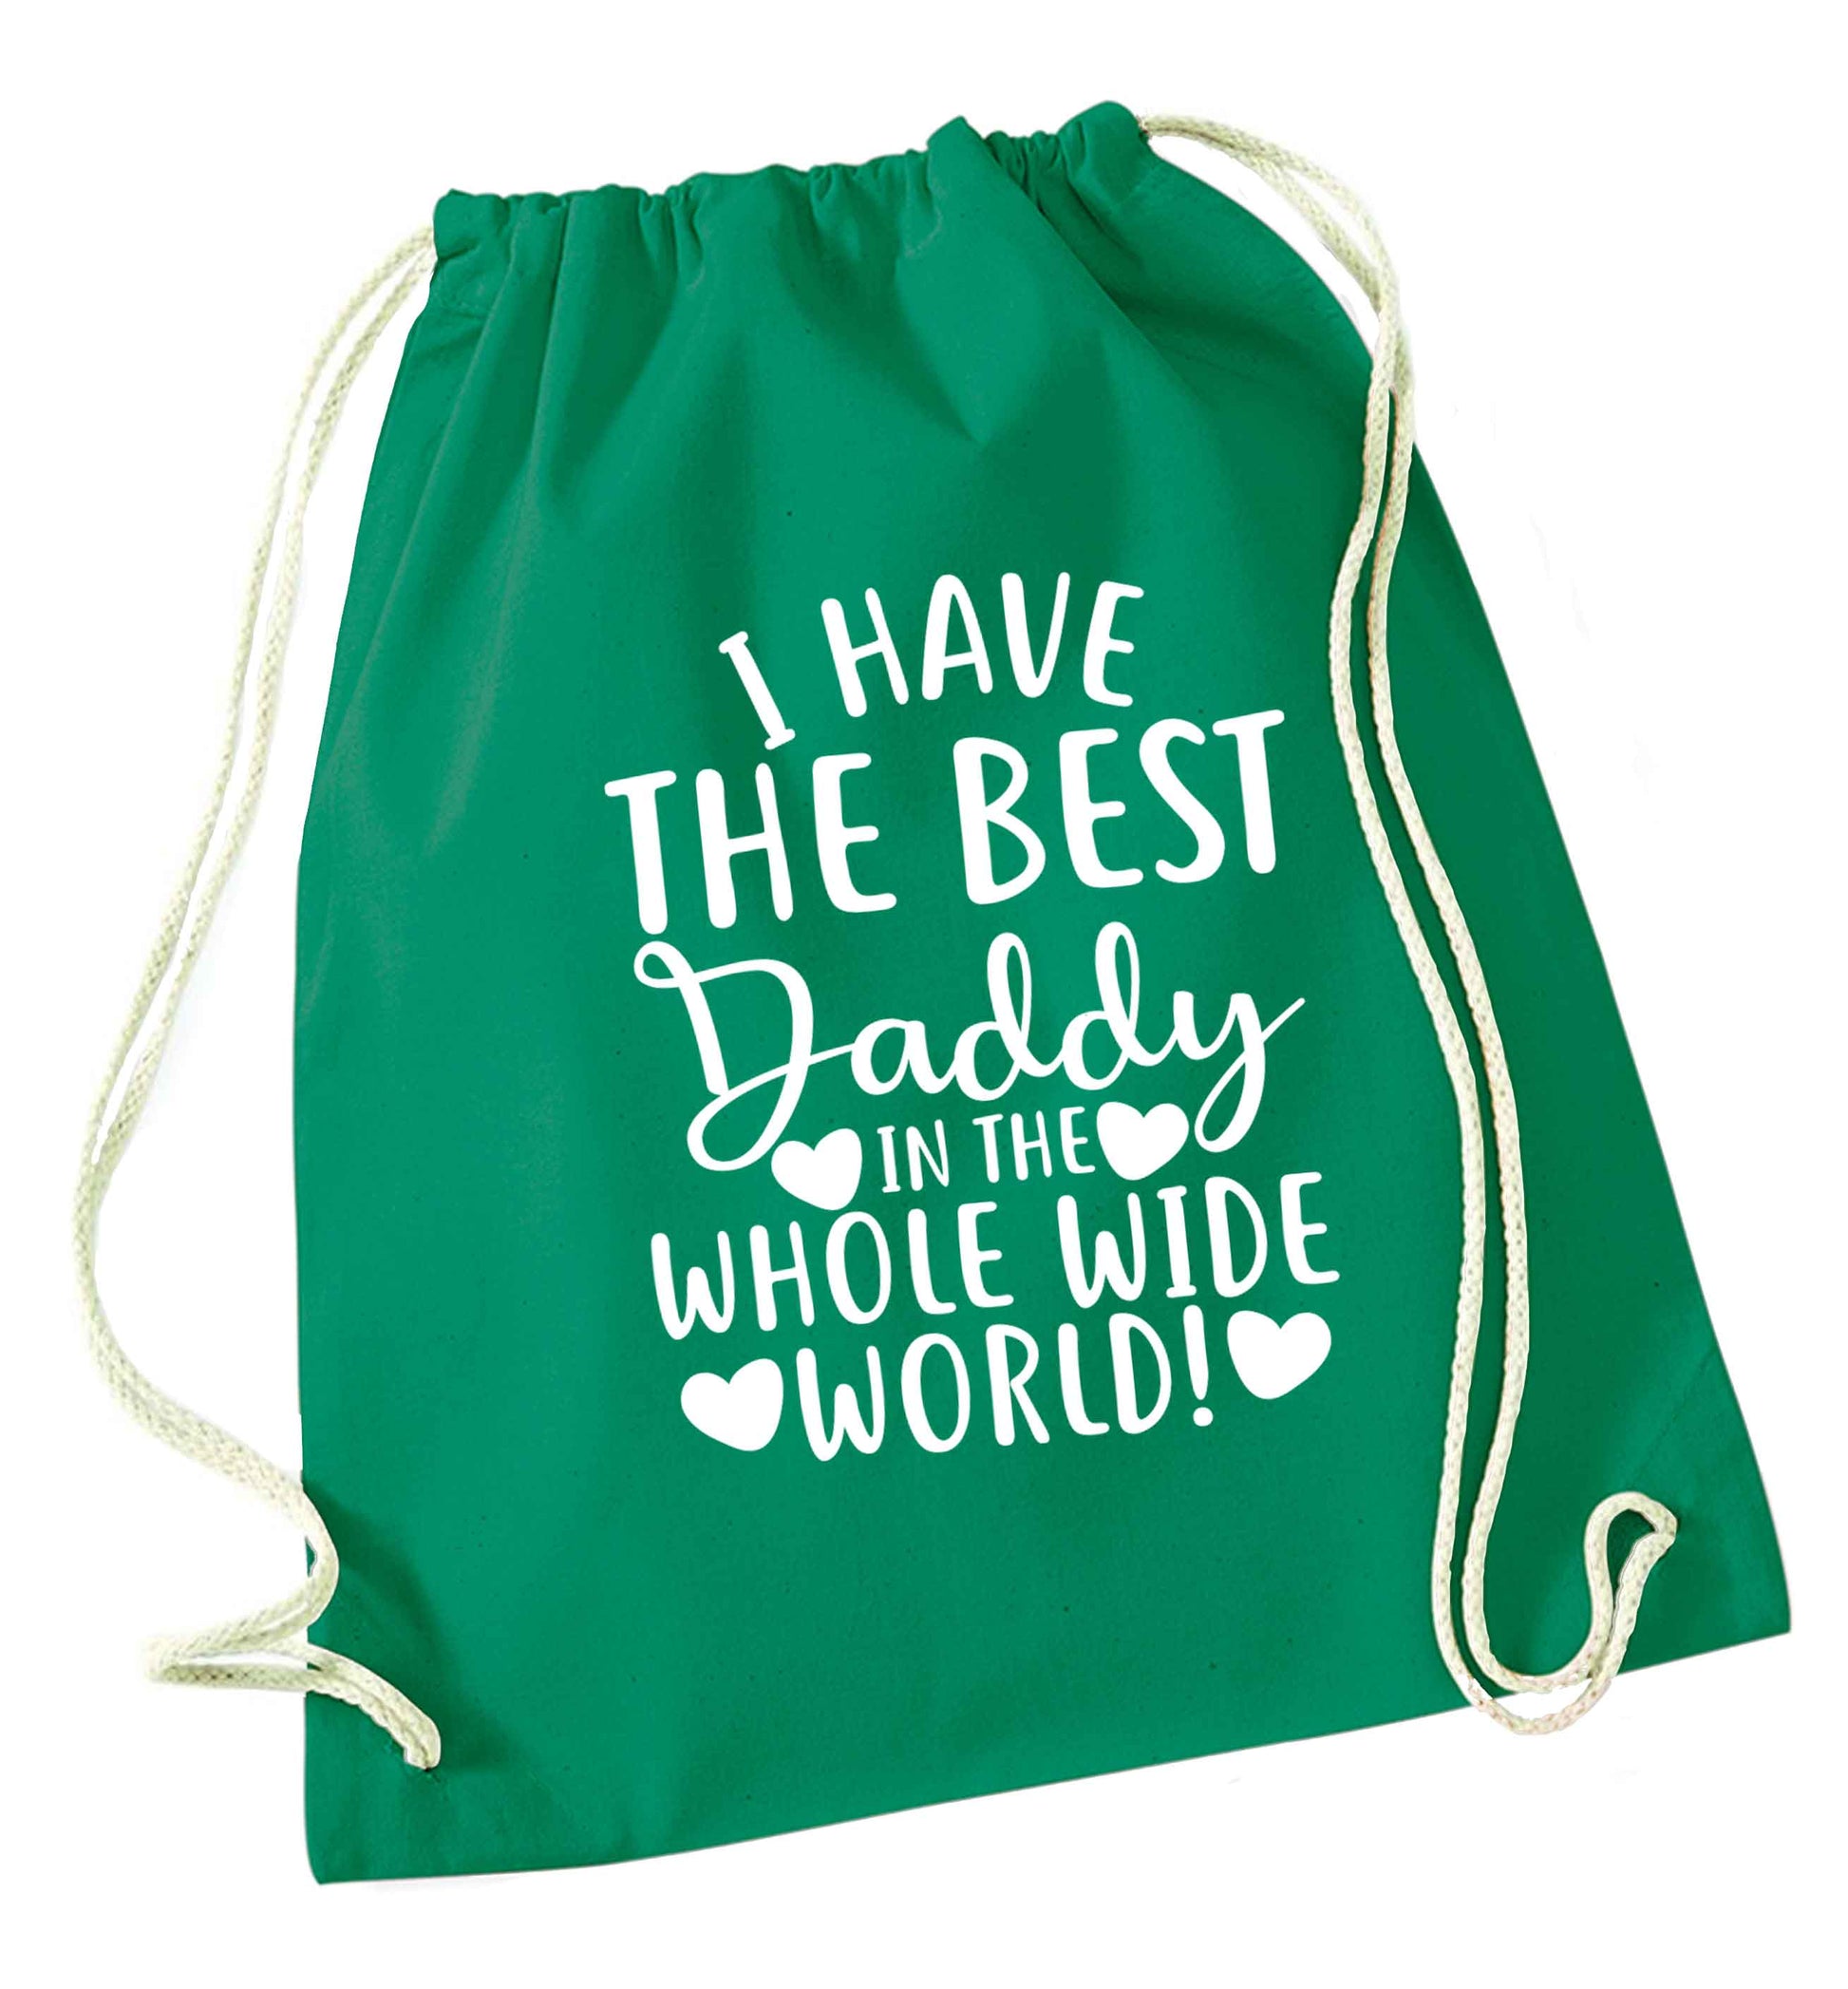 I have the best daddy in the whole wide world green drawstring bag